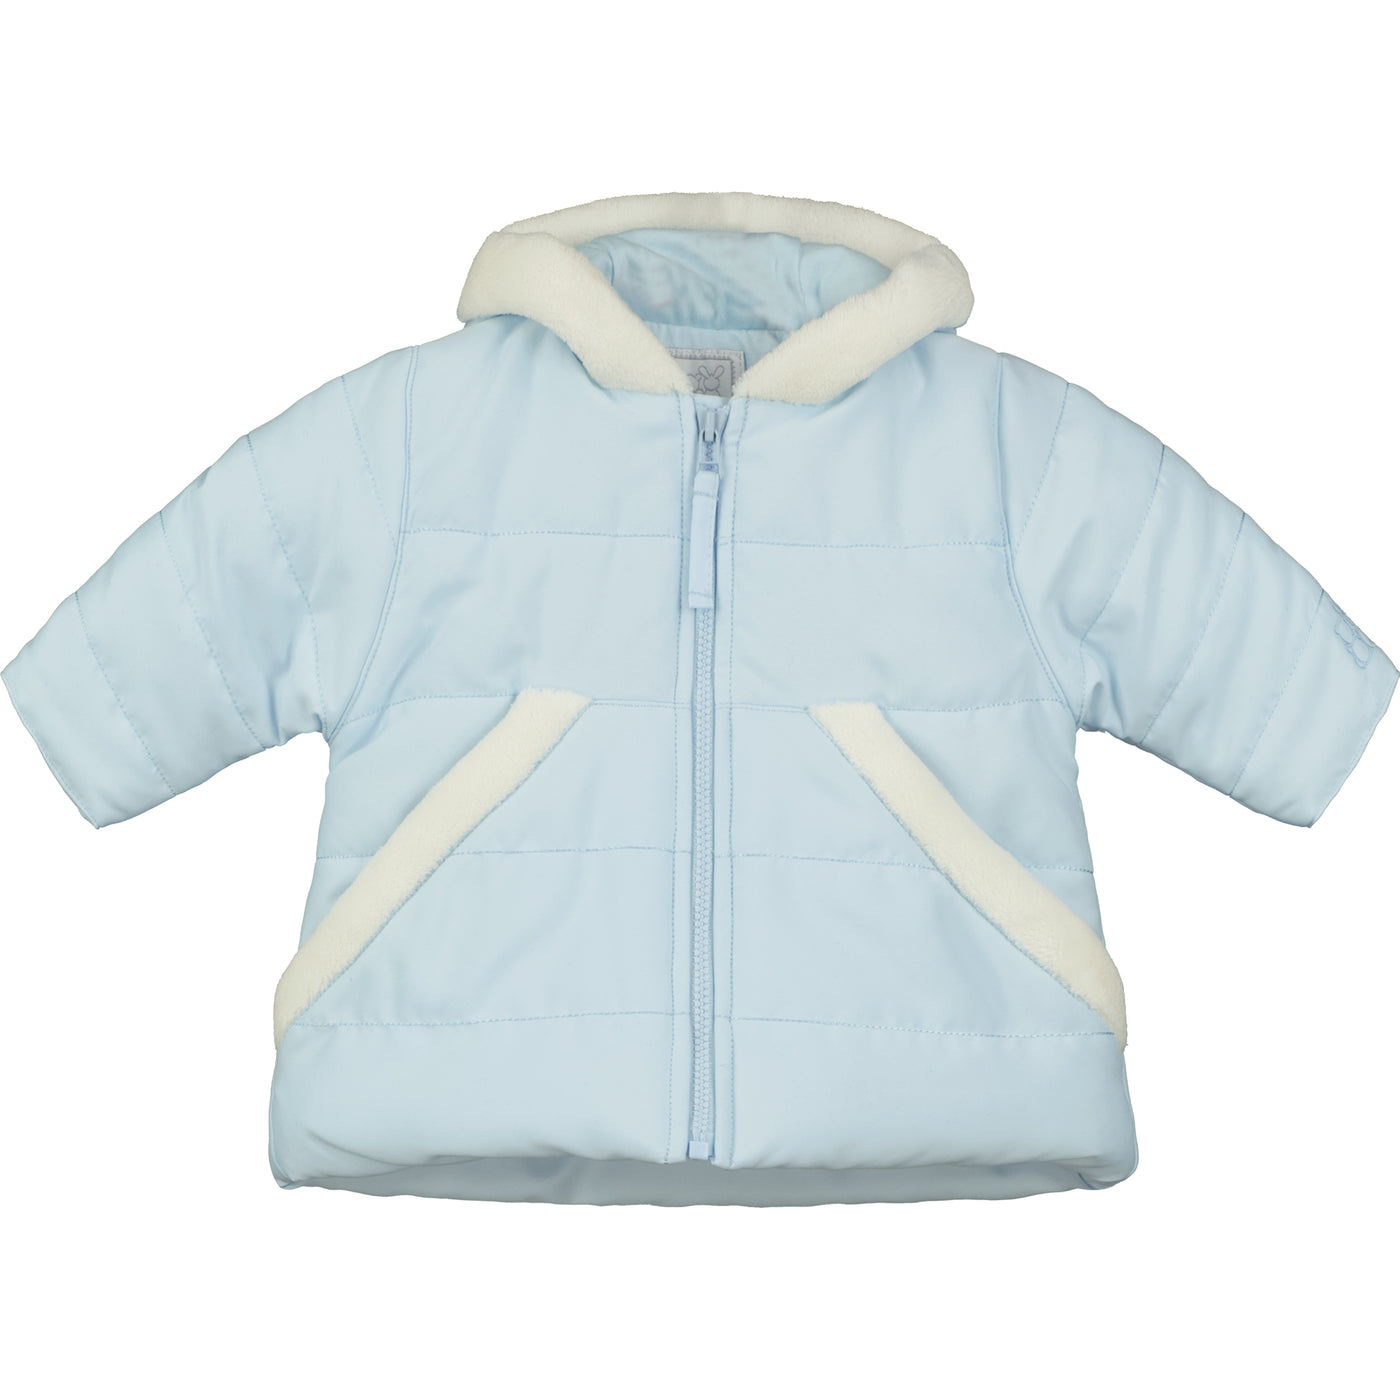 Ethan Baby Boys Microfibre Winter Jacket with Hood